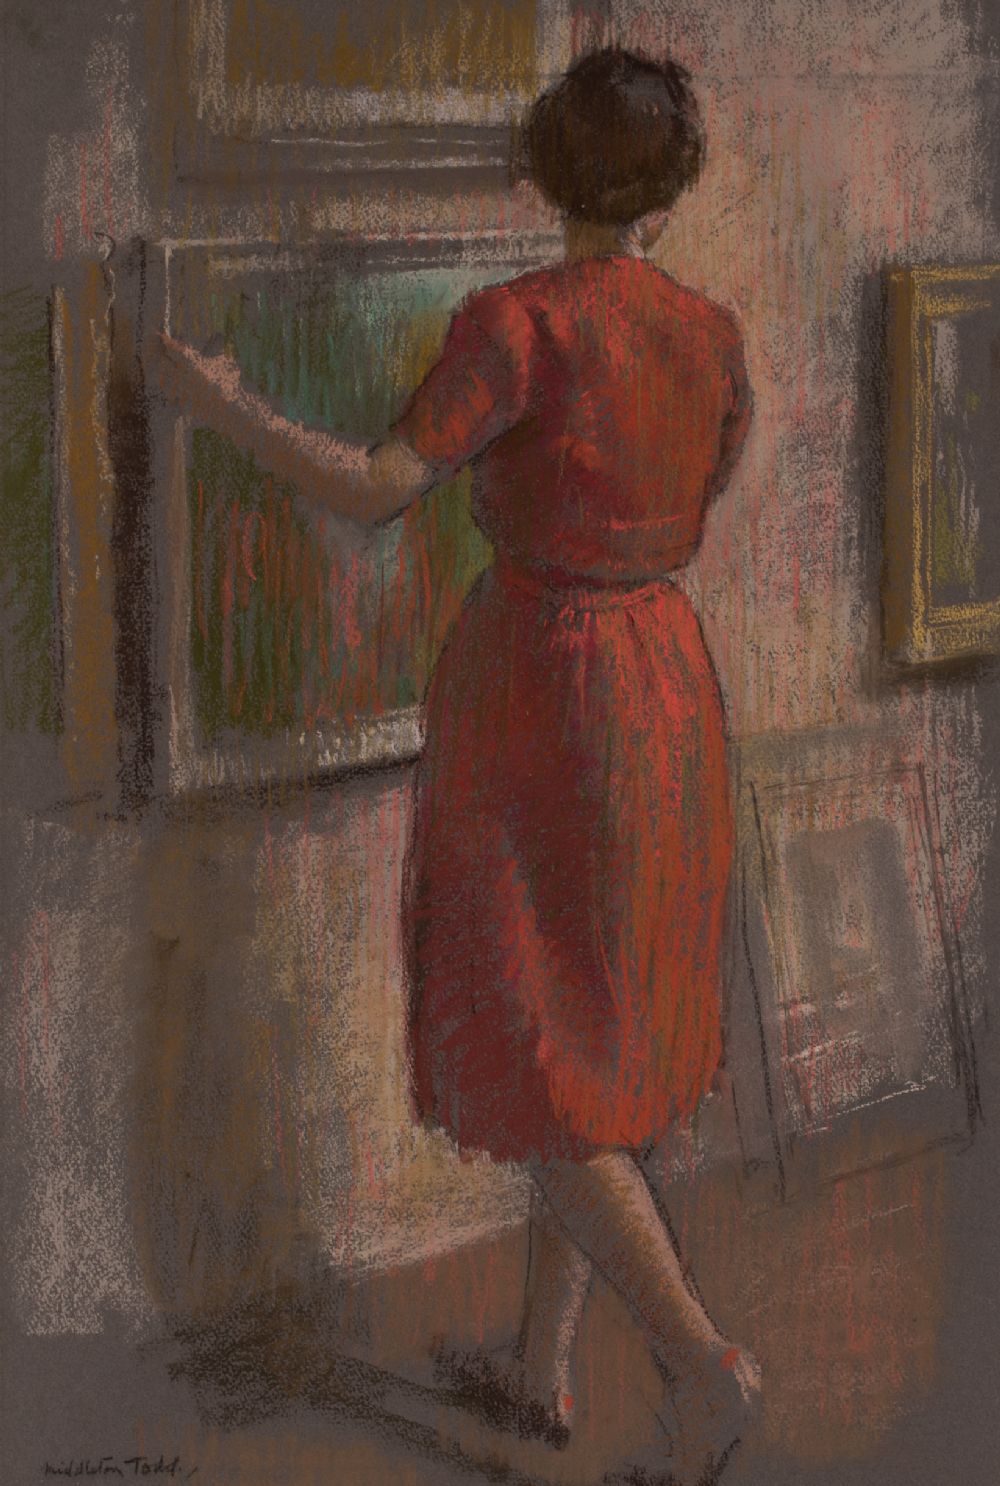 THE RED DRESS, PREPARING FOR THE EXHIBITION by Arthur Ralph Middleton Todd RA RE RWS at Dolan's Art Auction House